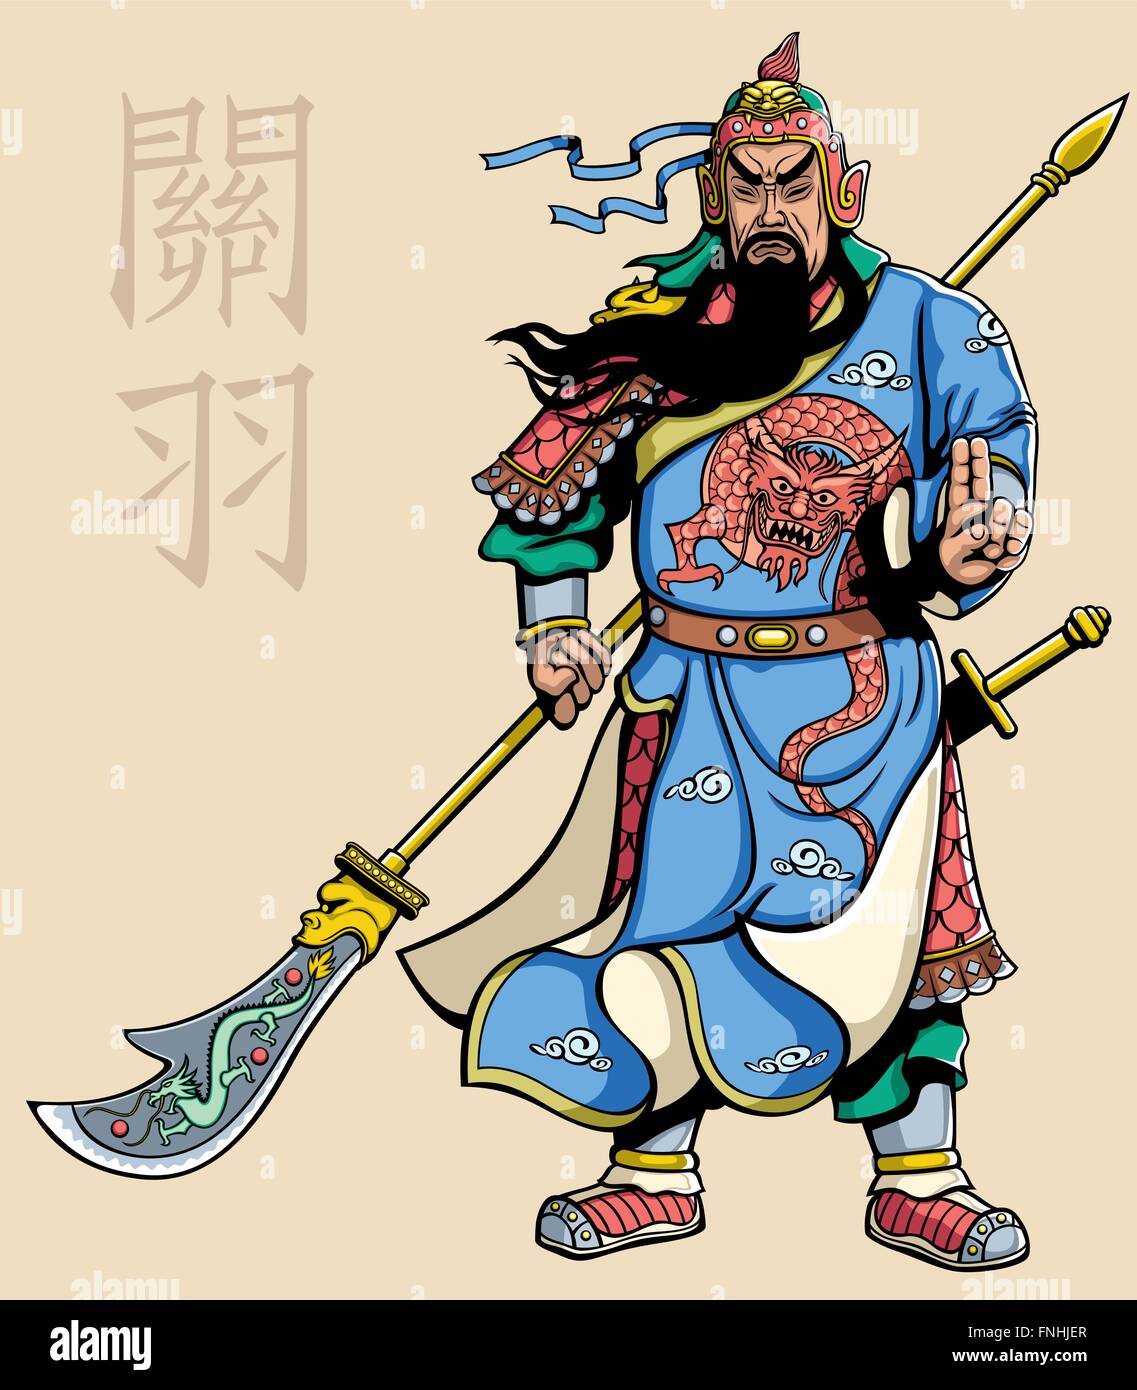 Vector illustration of the legendary Chinese general Guan Yu. Stock Vector